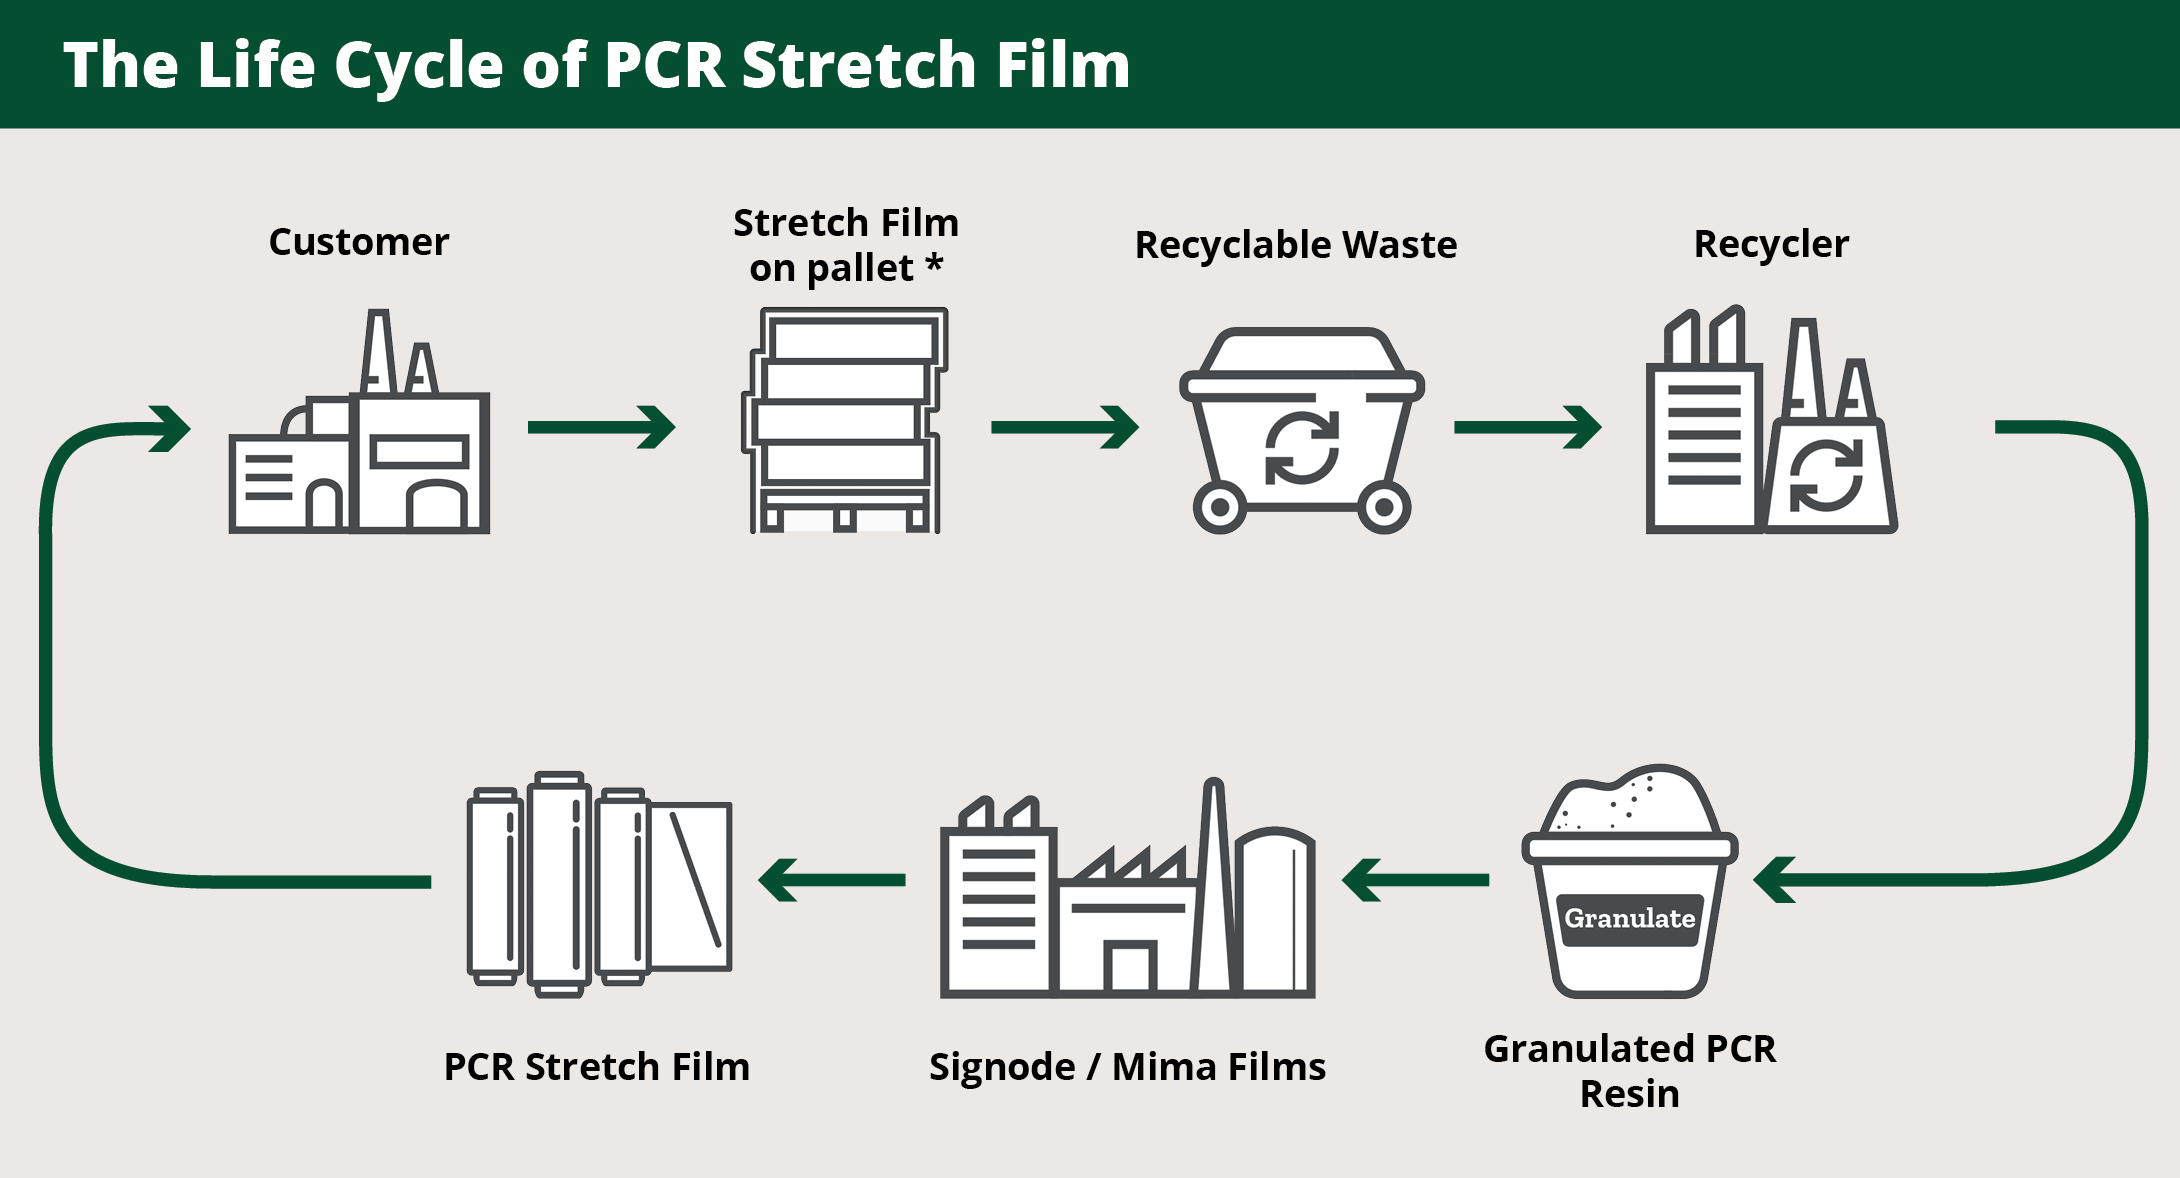 The life cycle of pcr stretch film includes stretch film on pallet to recycled waste to recycler to granulated pcr resin to signode plant to pcr stretch film to consumer and the cycle continues